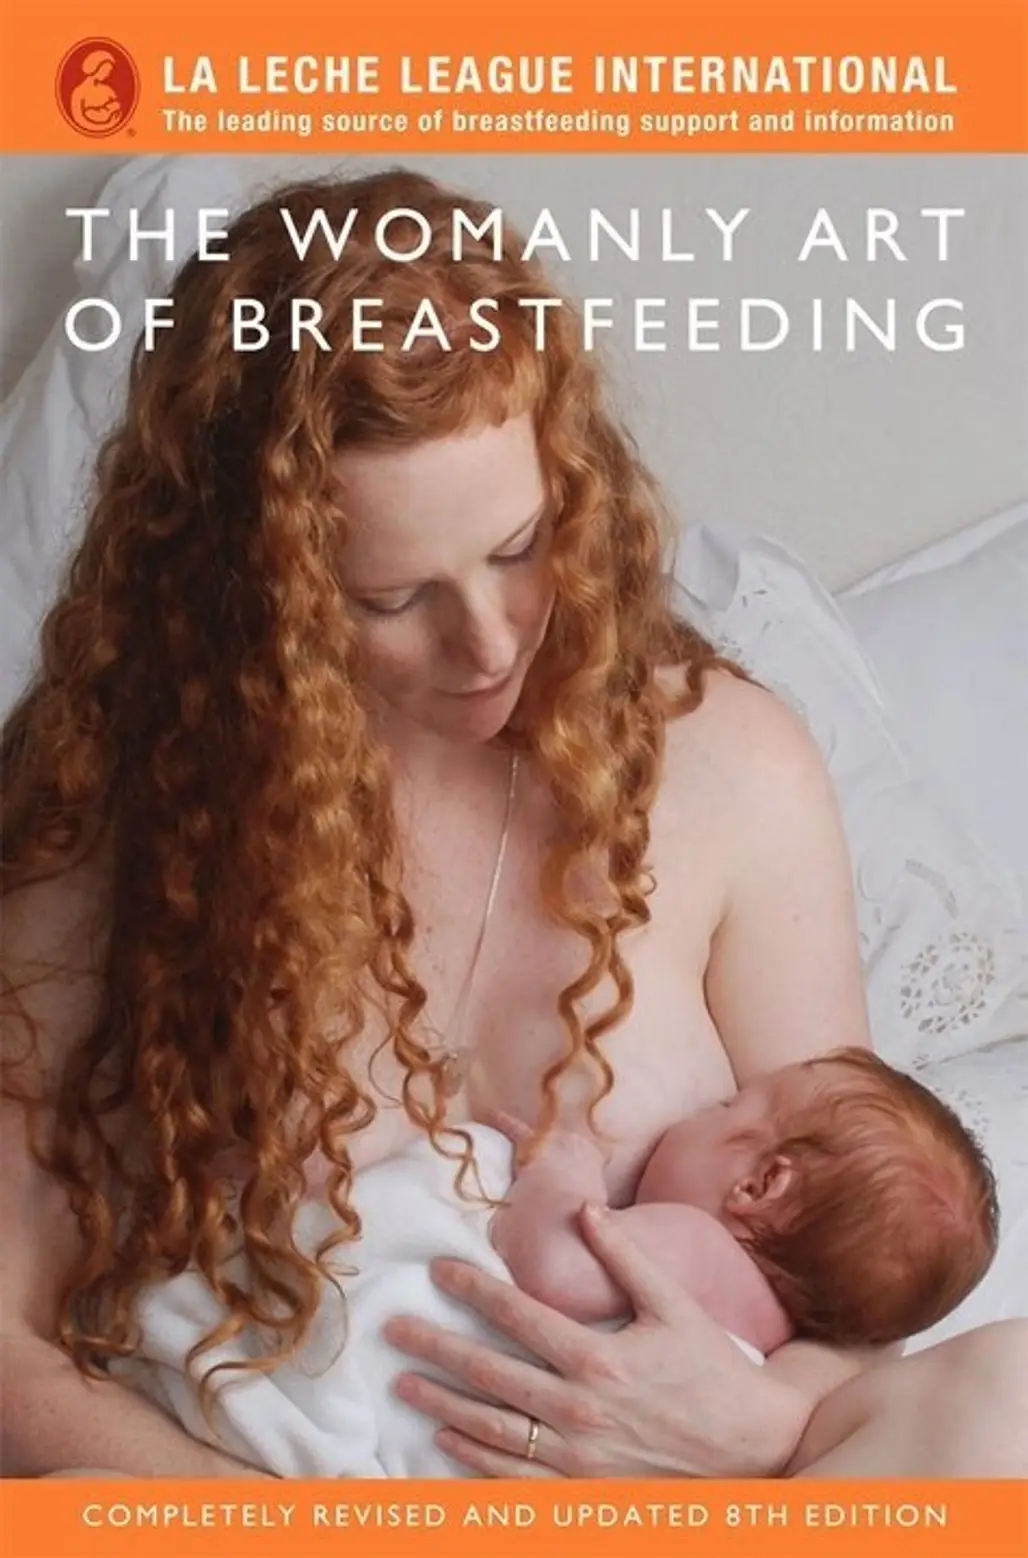 “the Womanly Art of Breastfeeding”